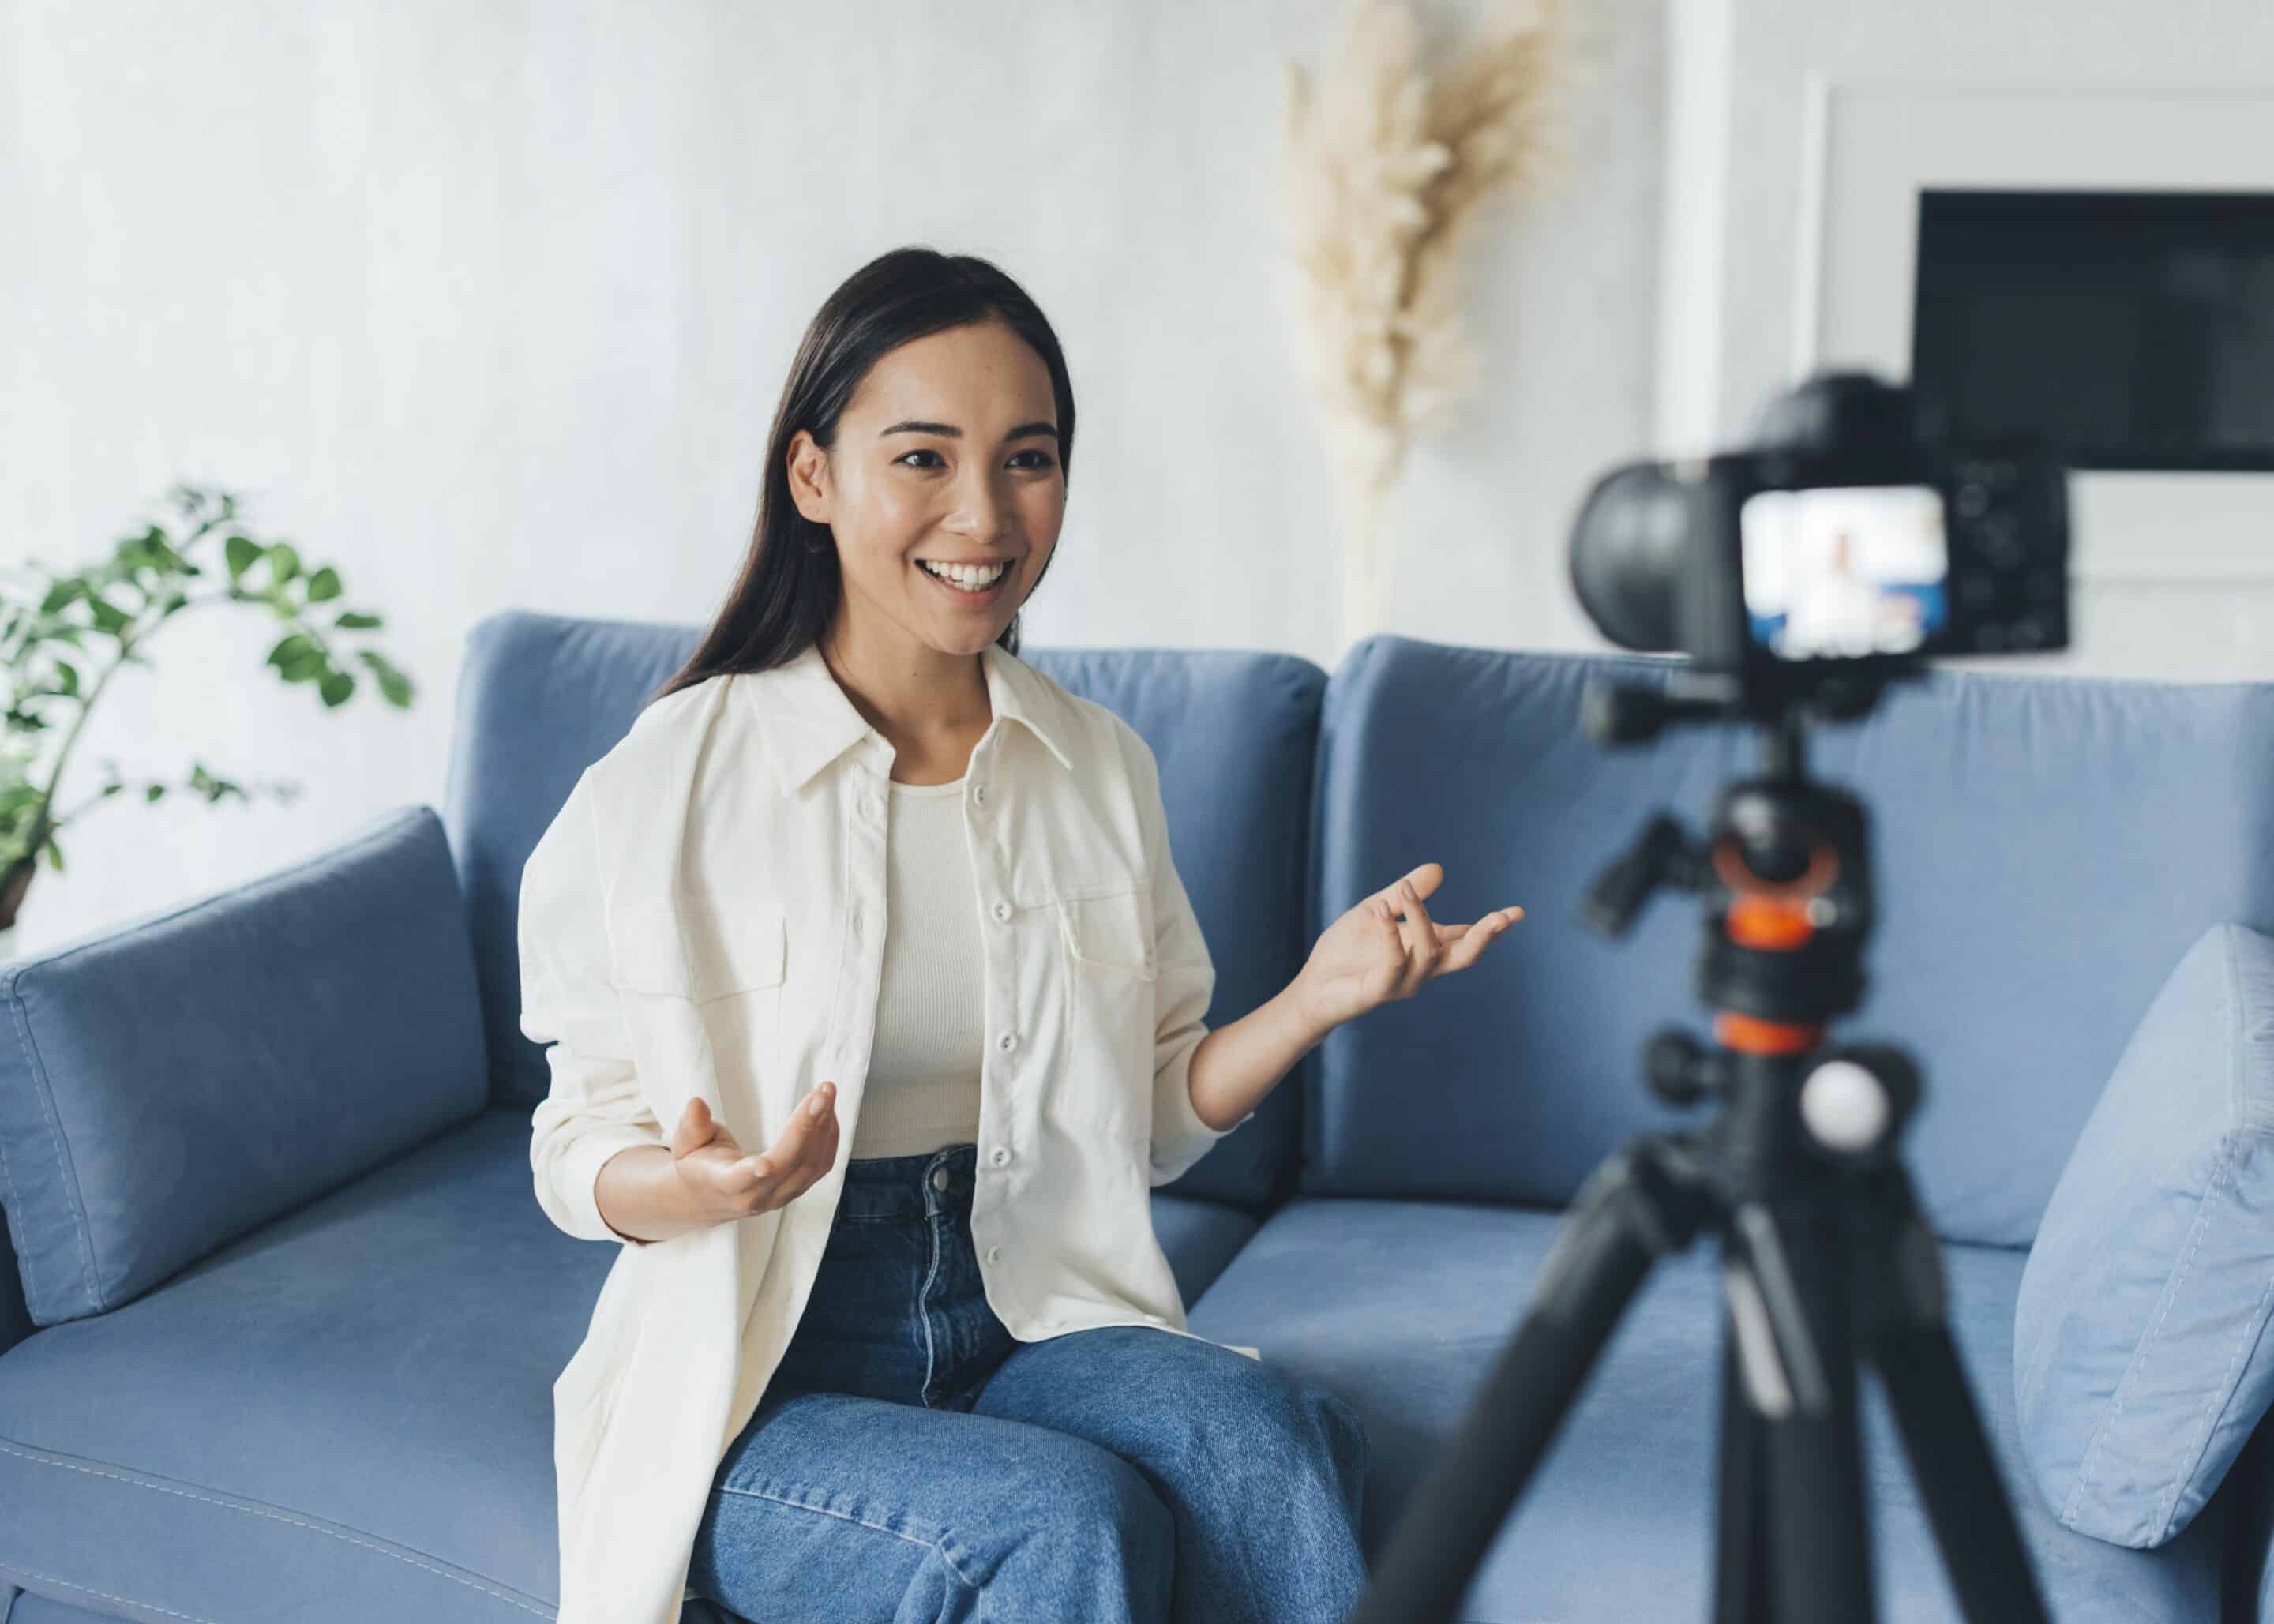 Why Is Video Marketing So Important for Small Business